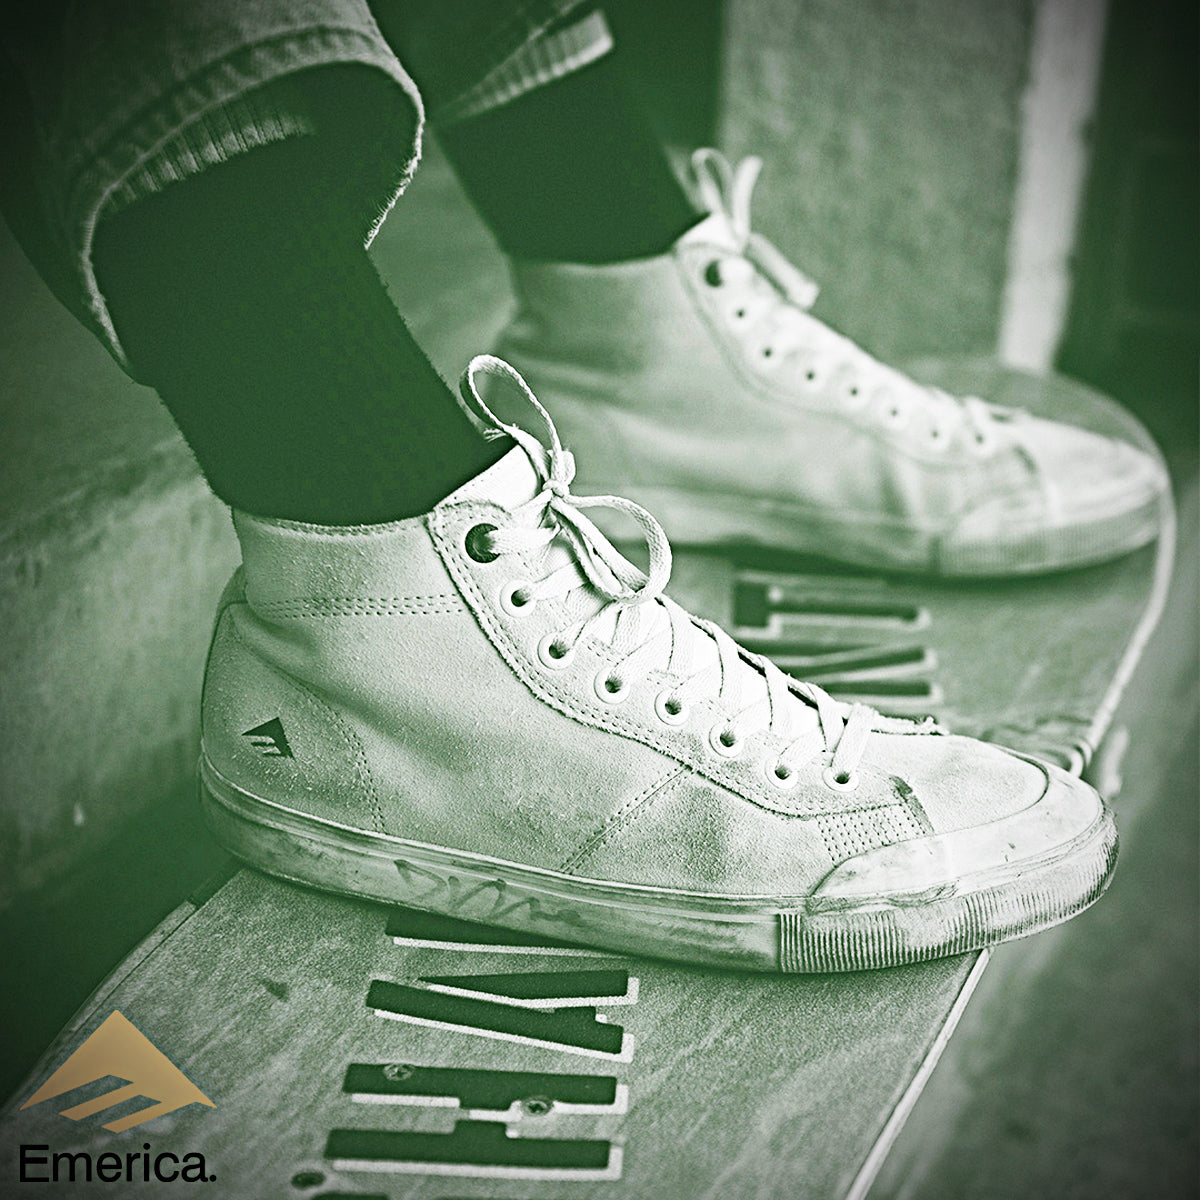 action skate shoes